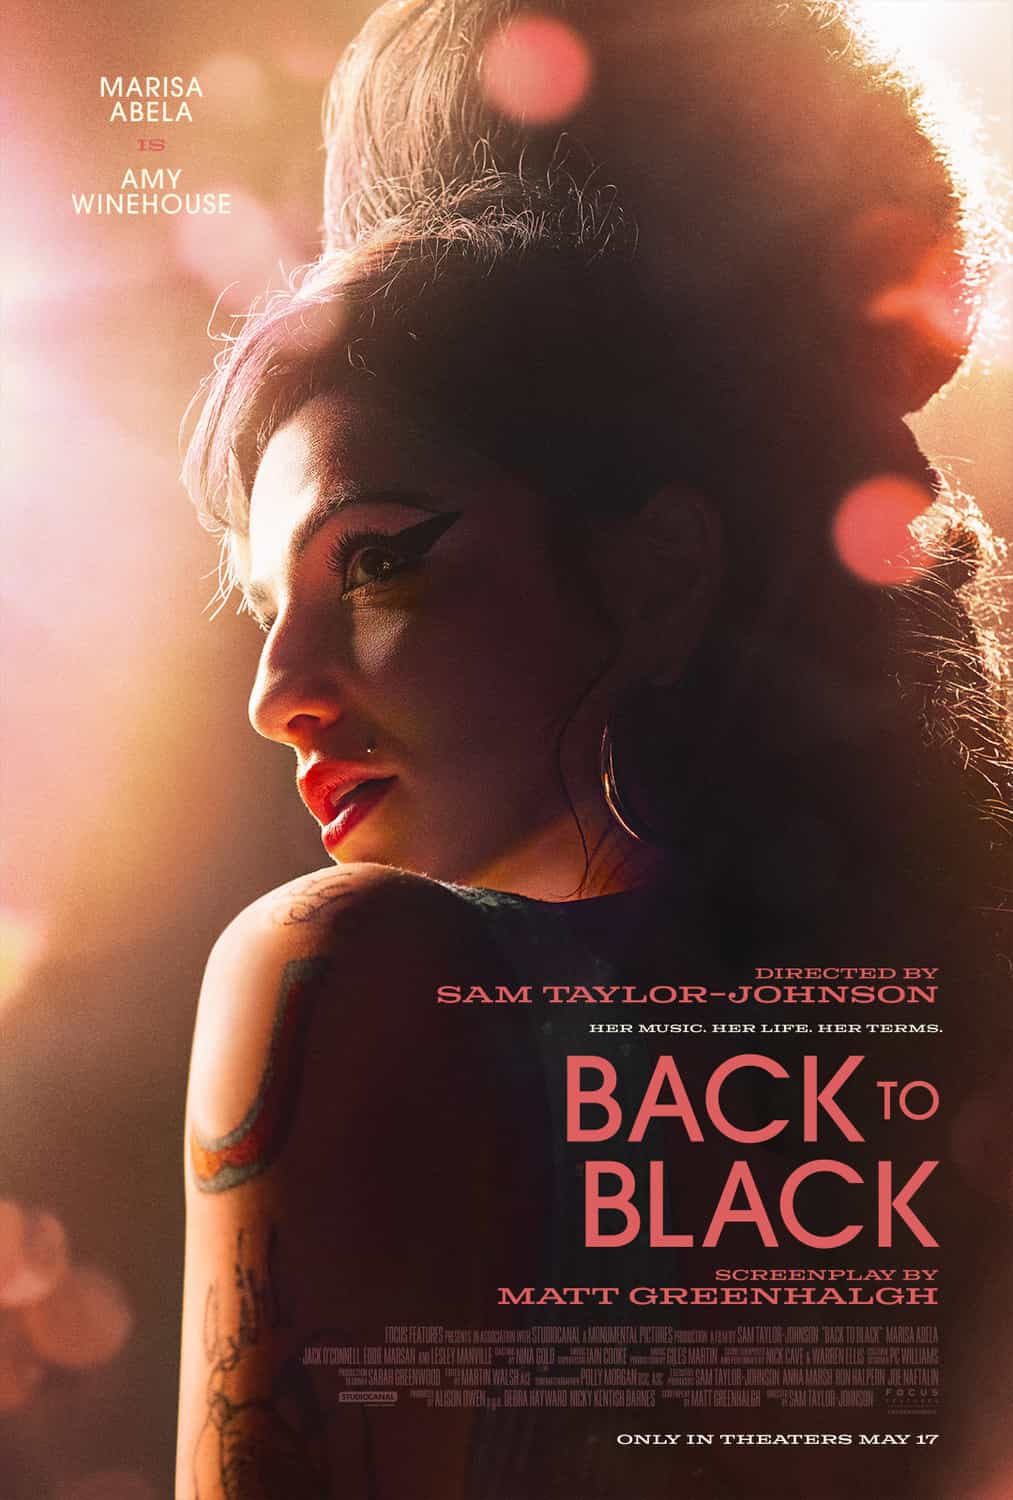 Back to Black: Why the controversial Amy Winehouse biopic is angering fans